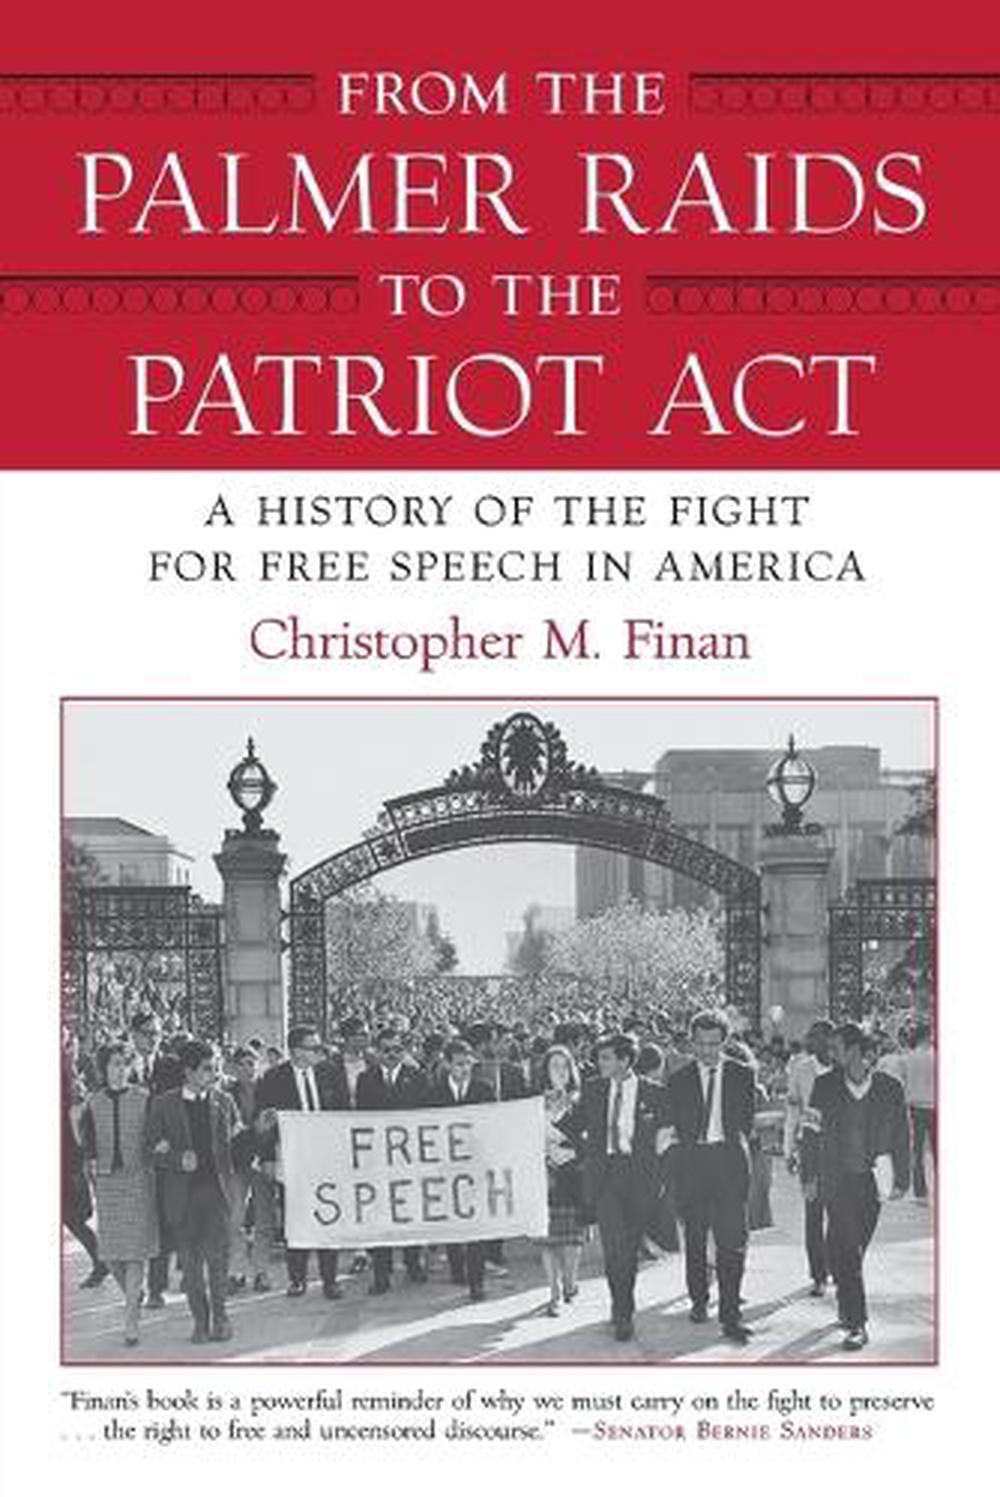 patriot act scholarly articles